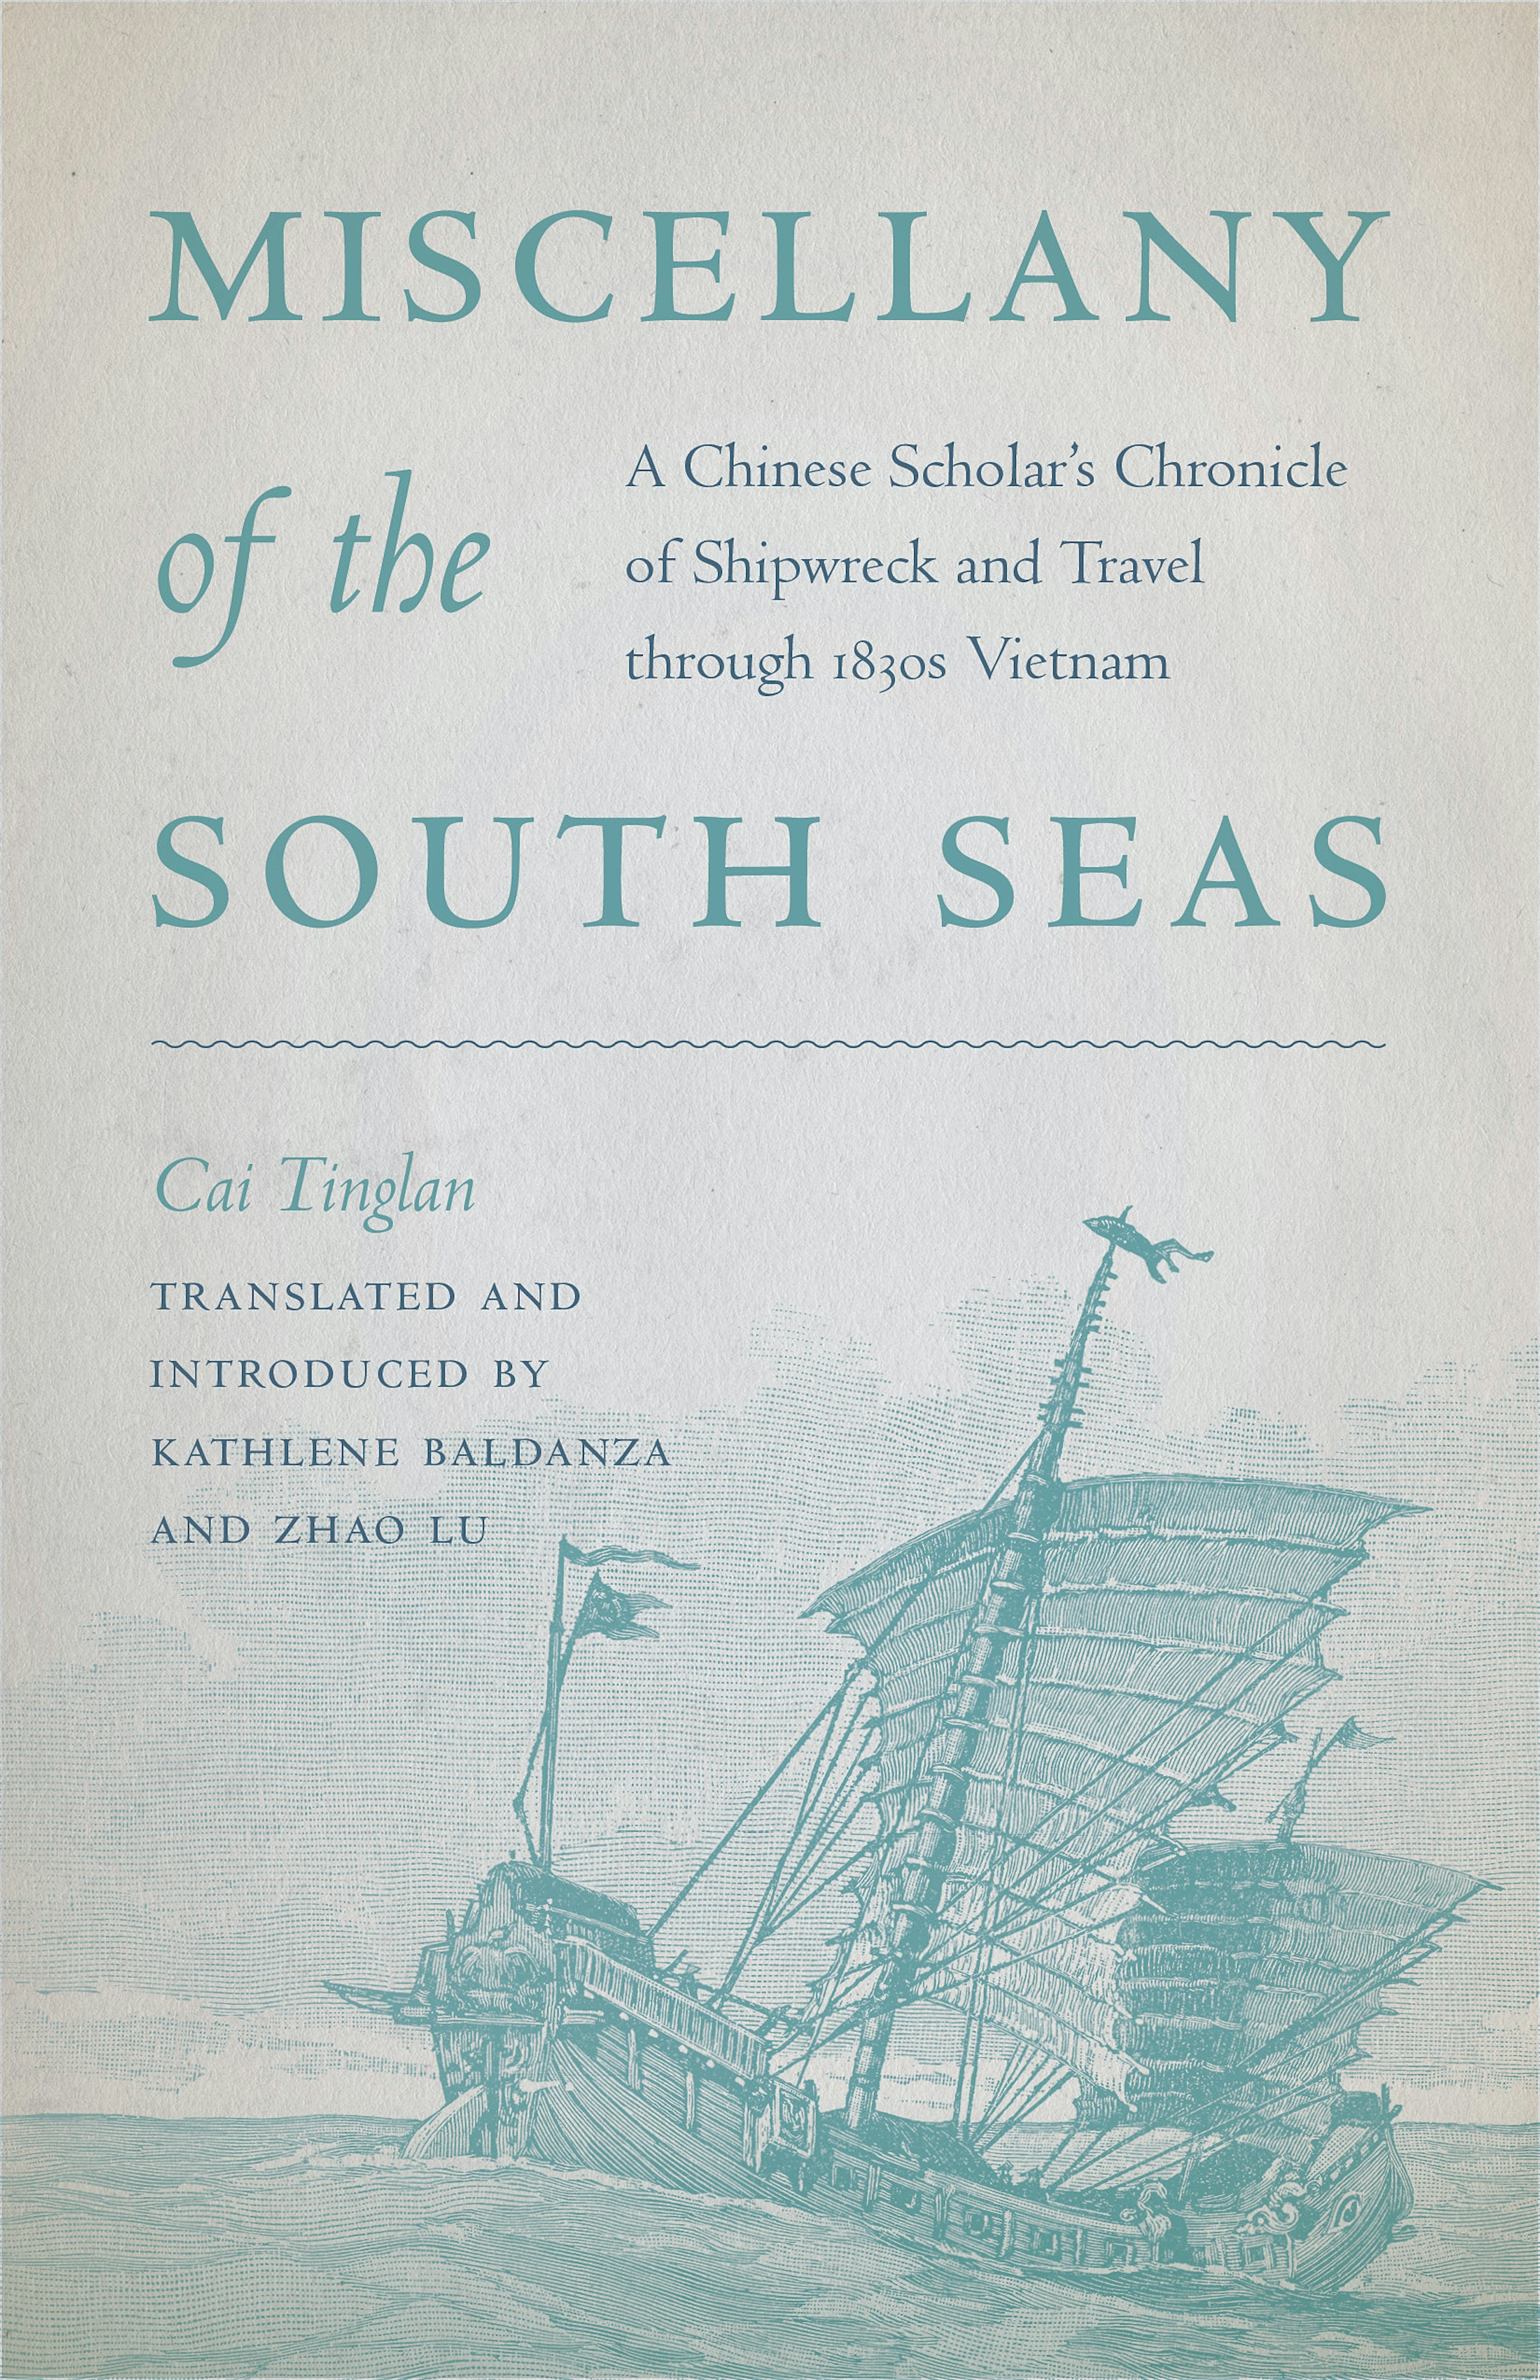 Miscellany of the South Seas